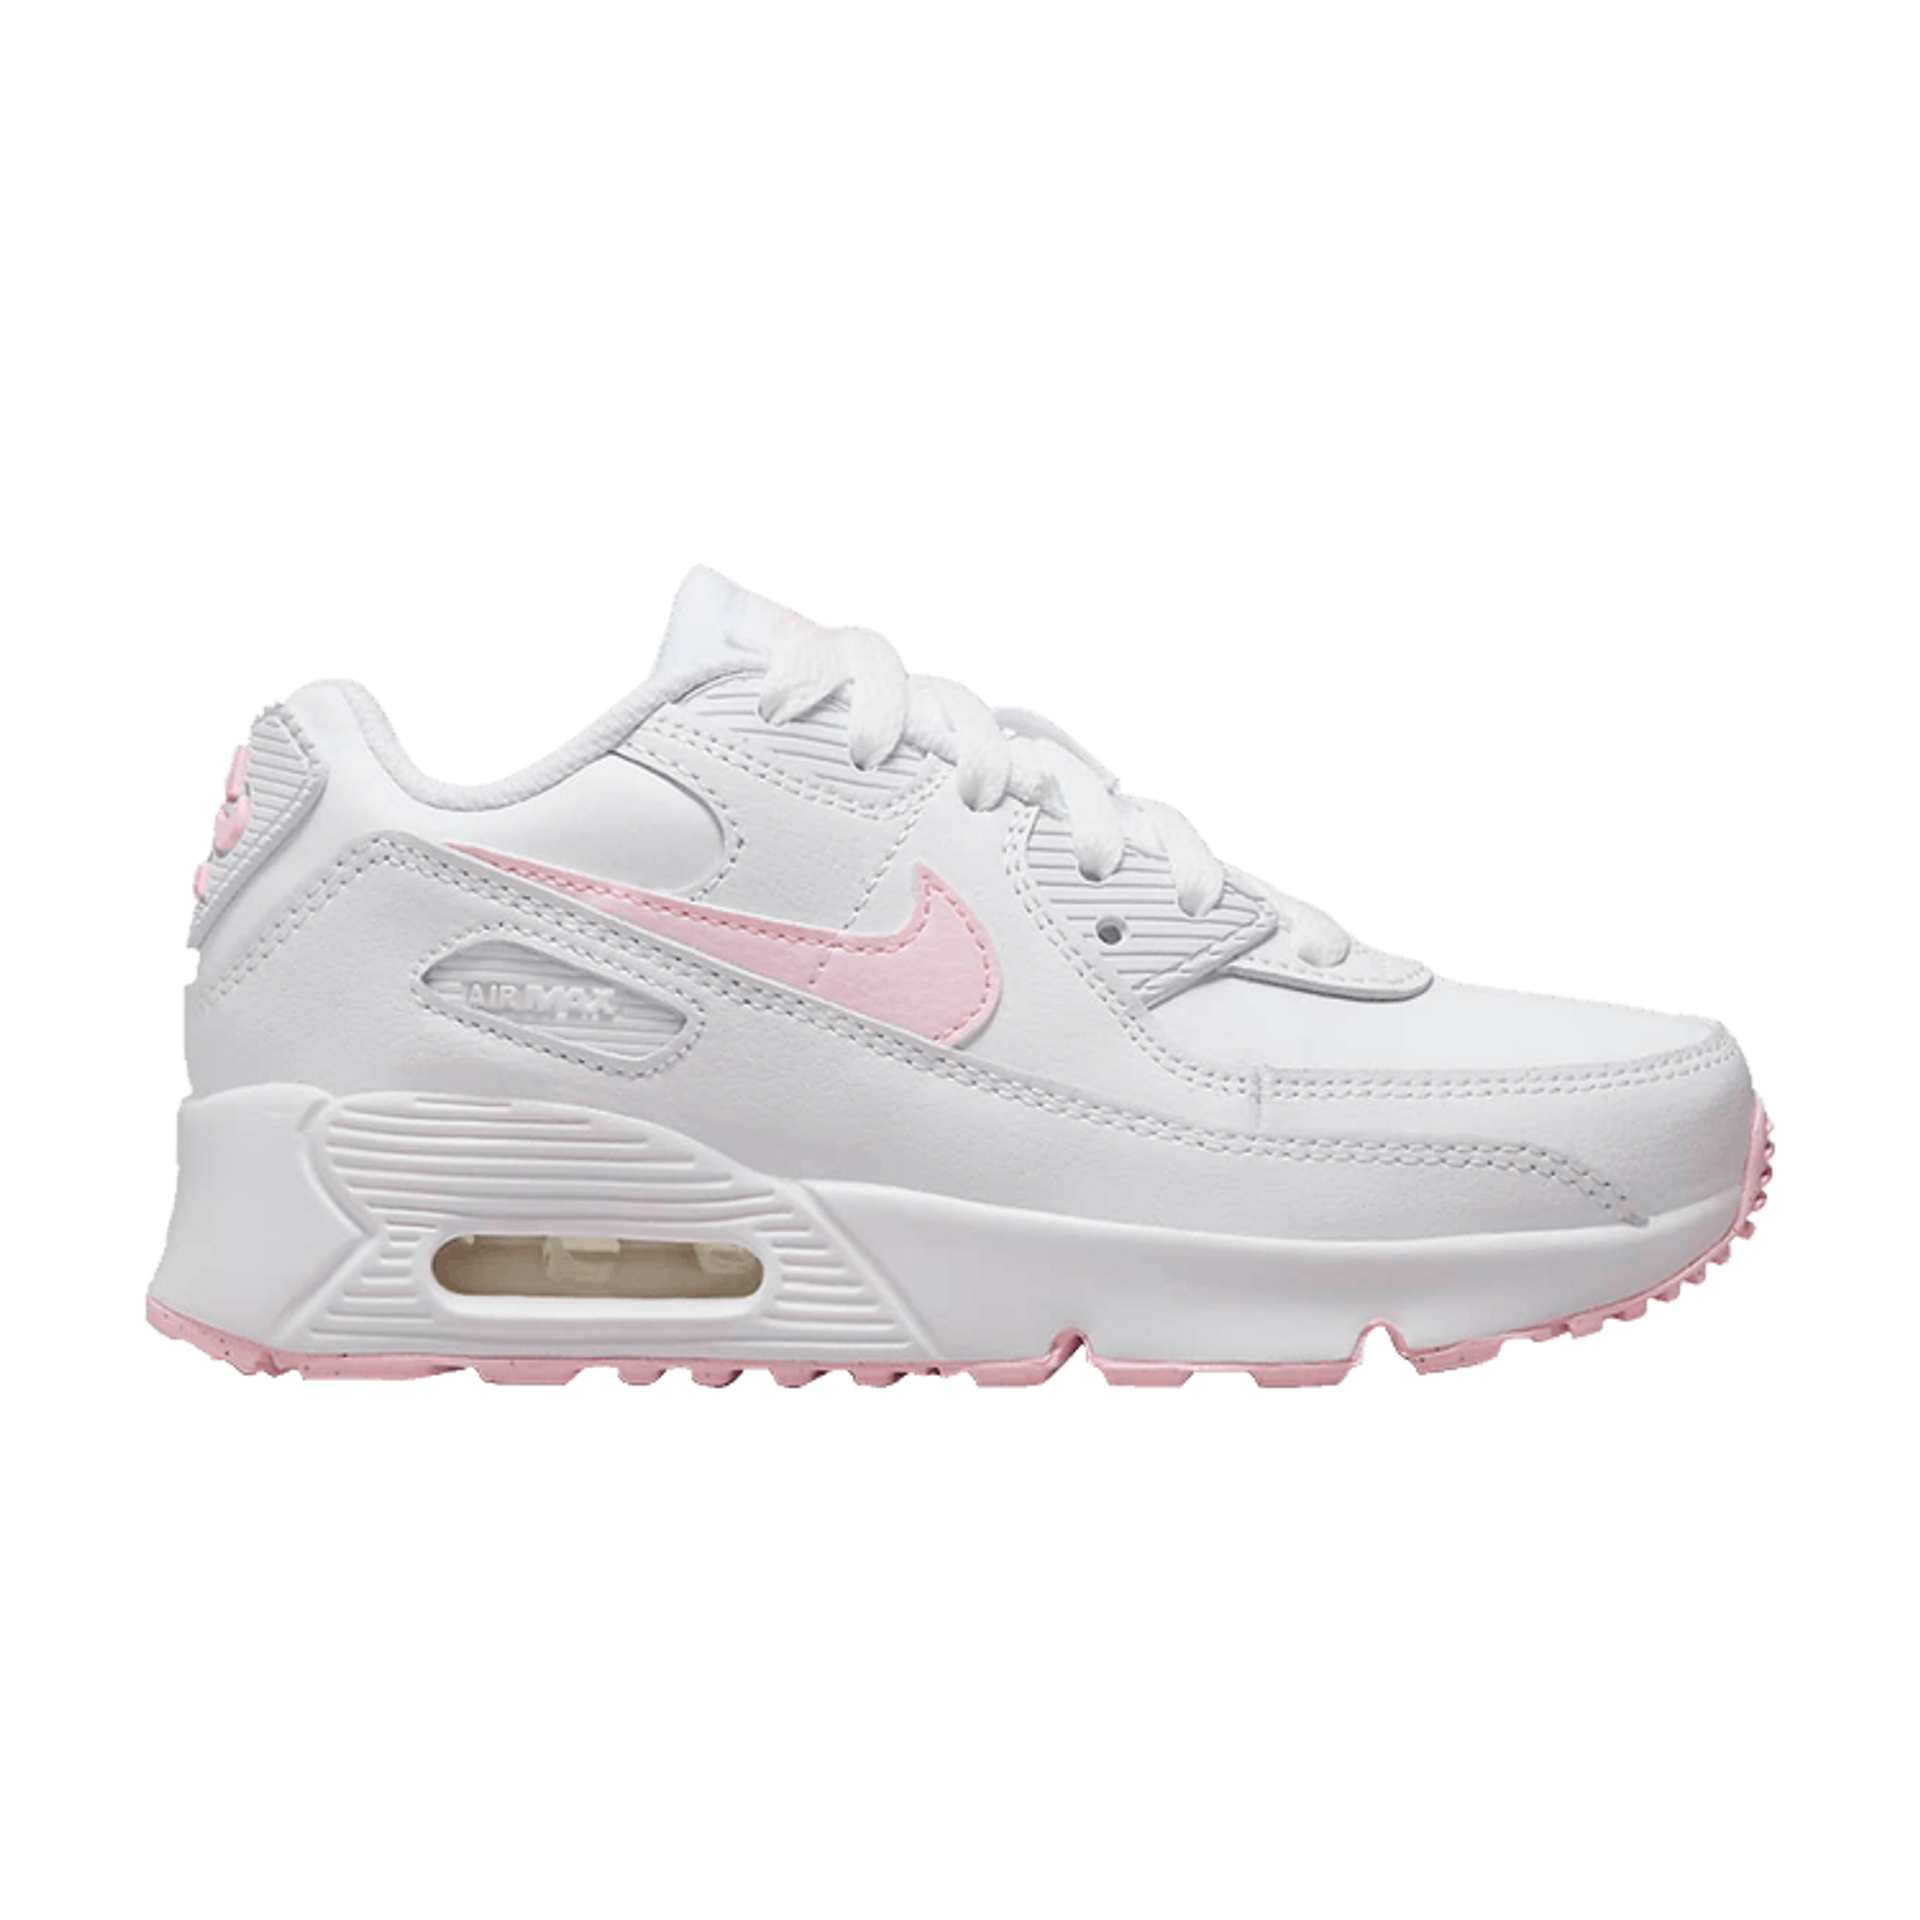 Air Max 90 Leather PS 'White Pink Foam'